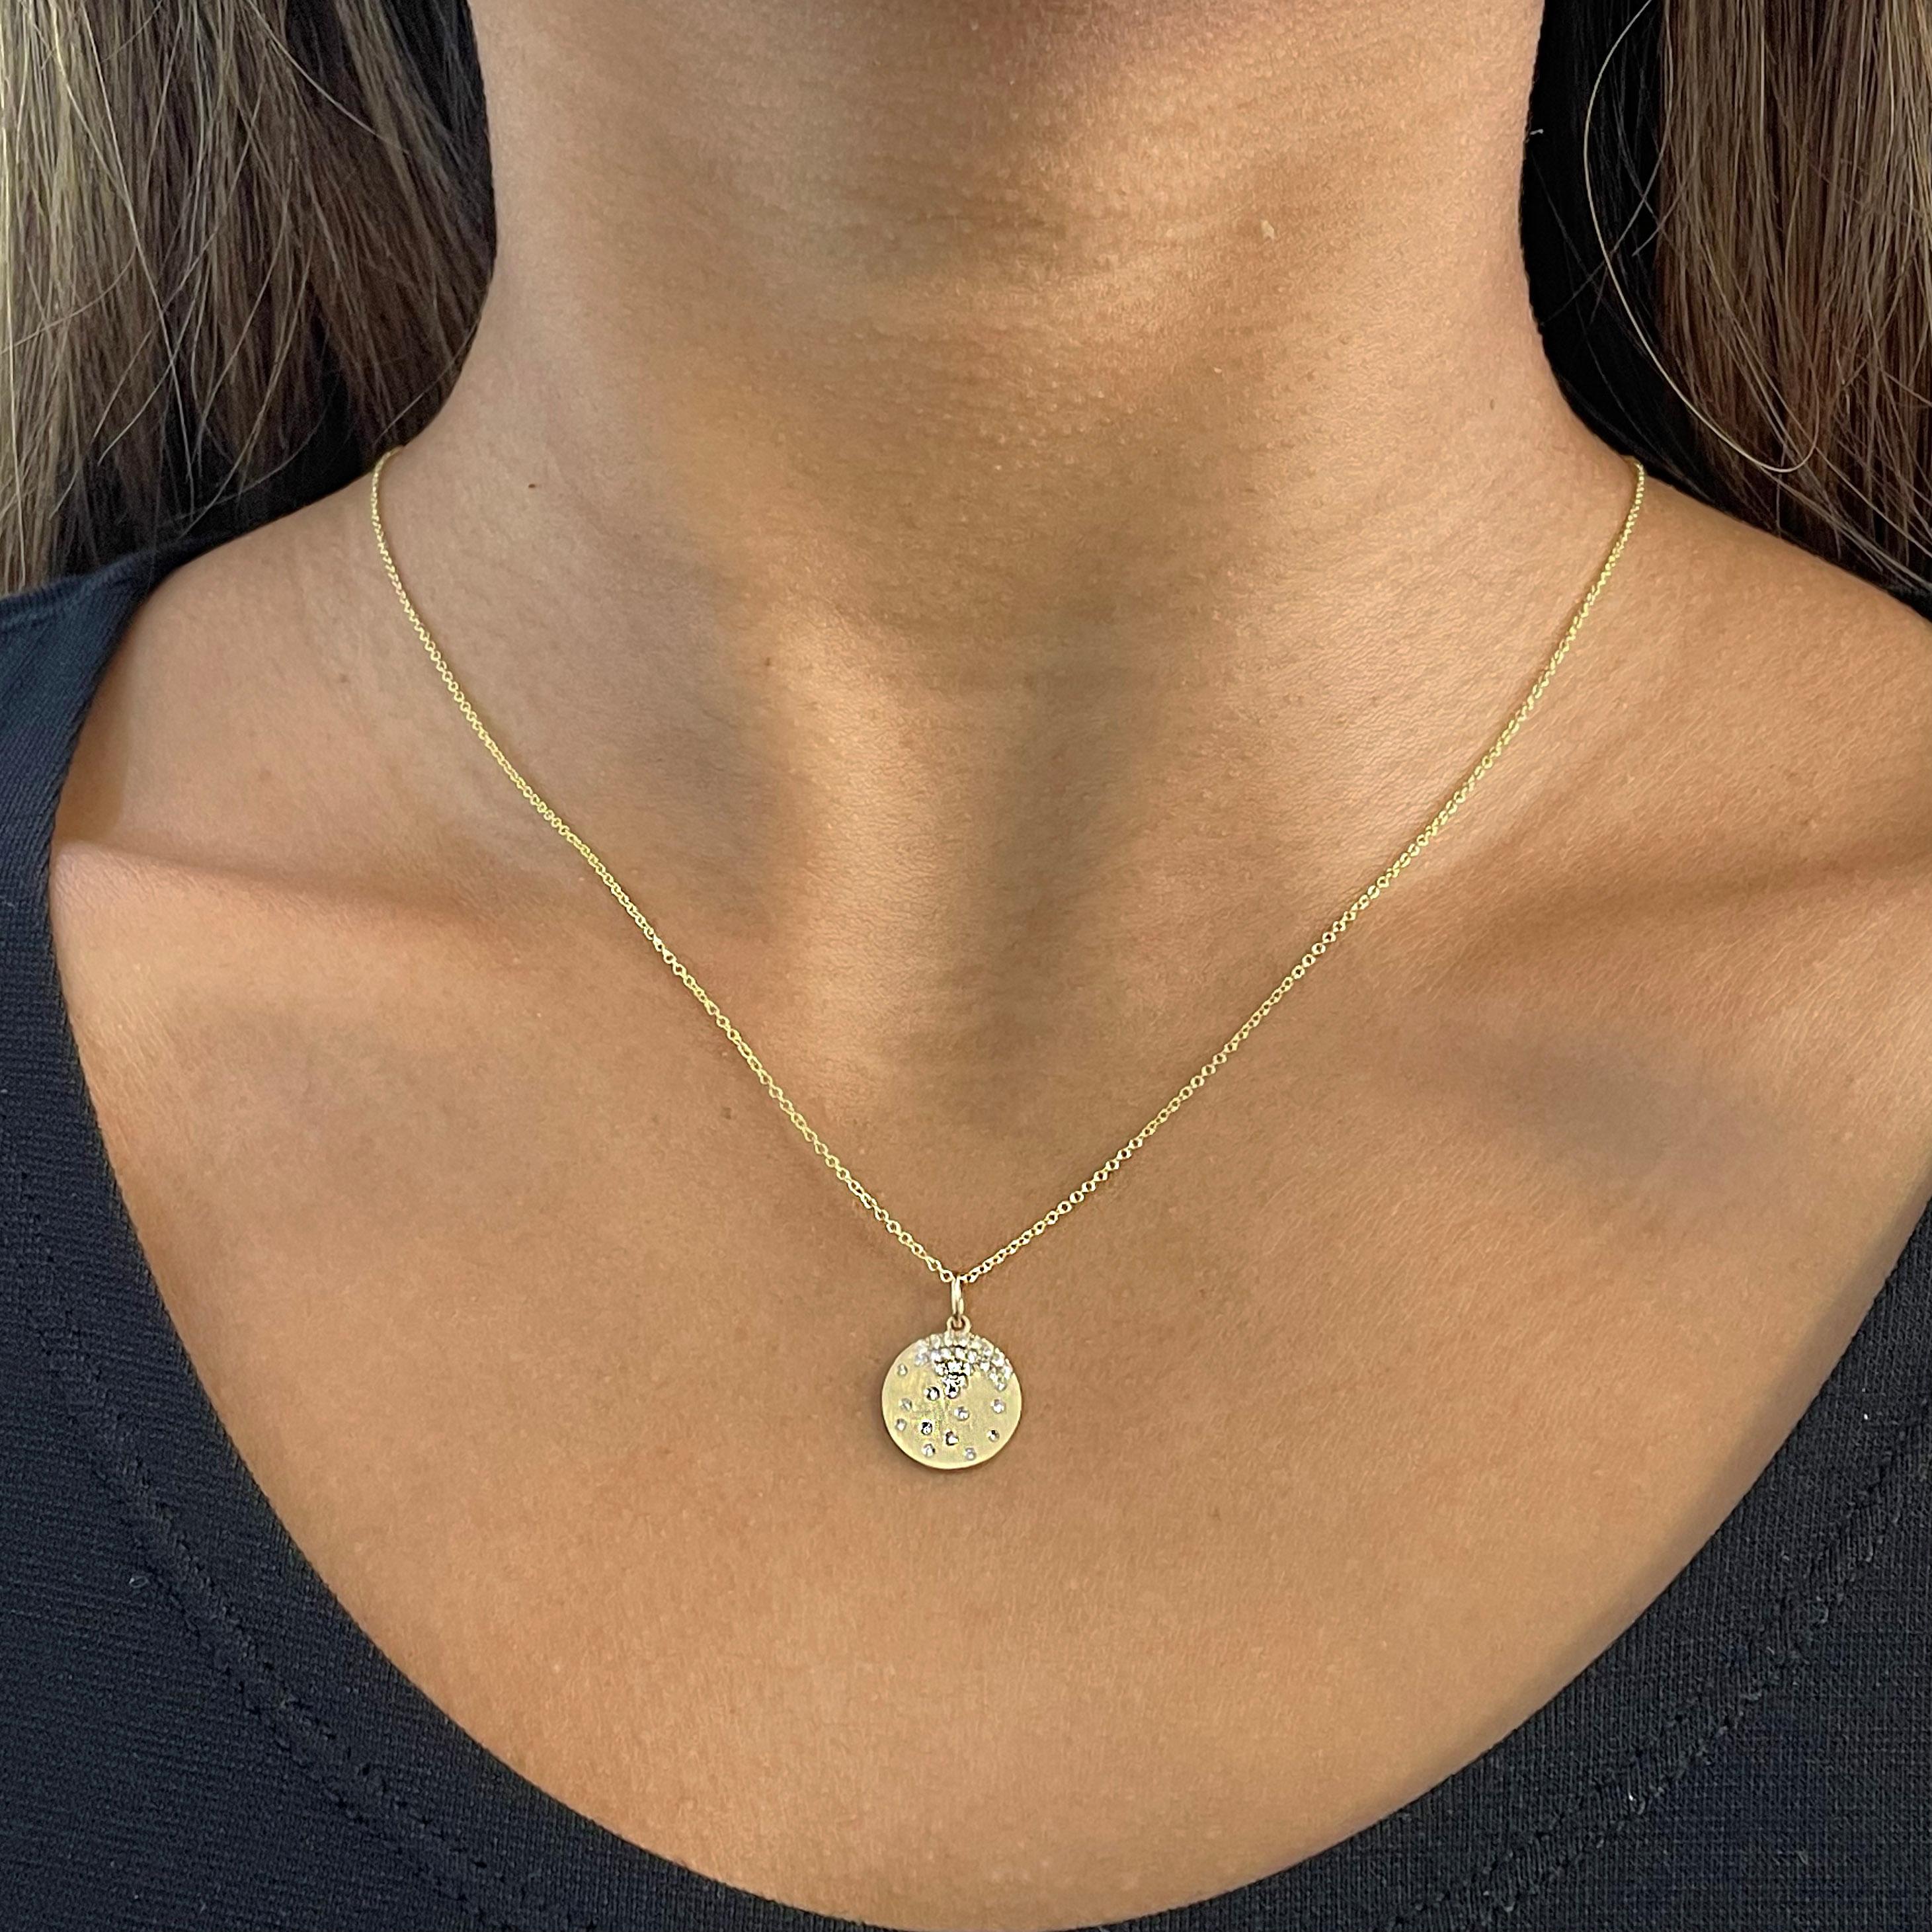 This confetti necklace contains a round pendant with small round diamonds placed in a seemingly random fashion to create one of the most beautifully unique pieces of jewelry. It resembles confetti falling from the top and is perfect on its own or